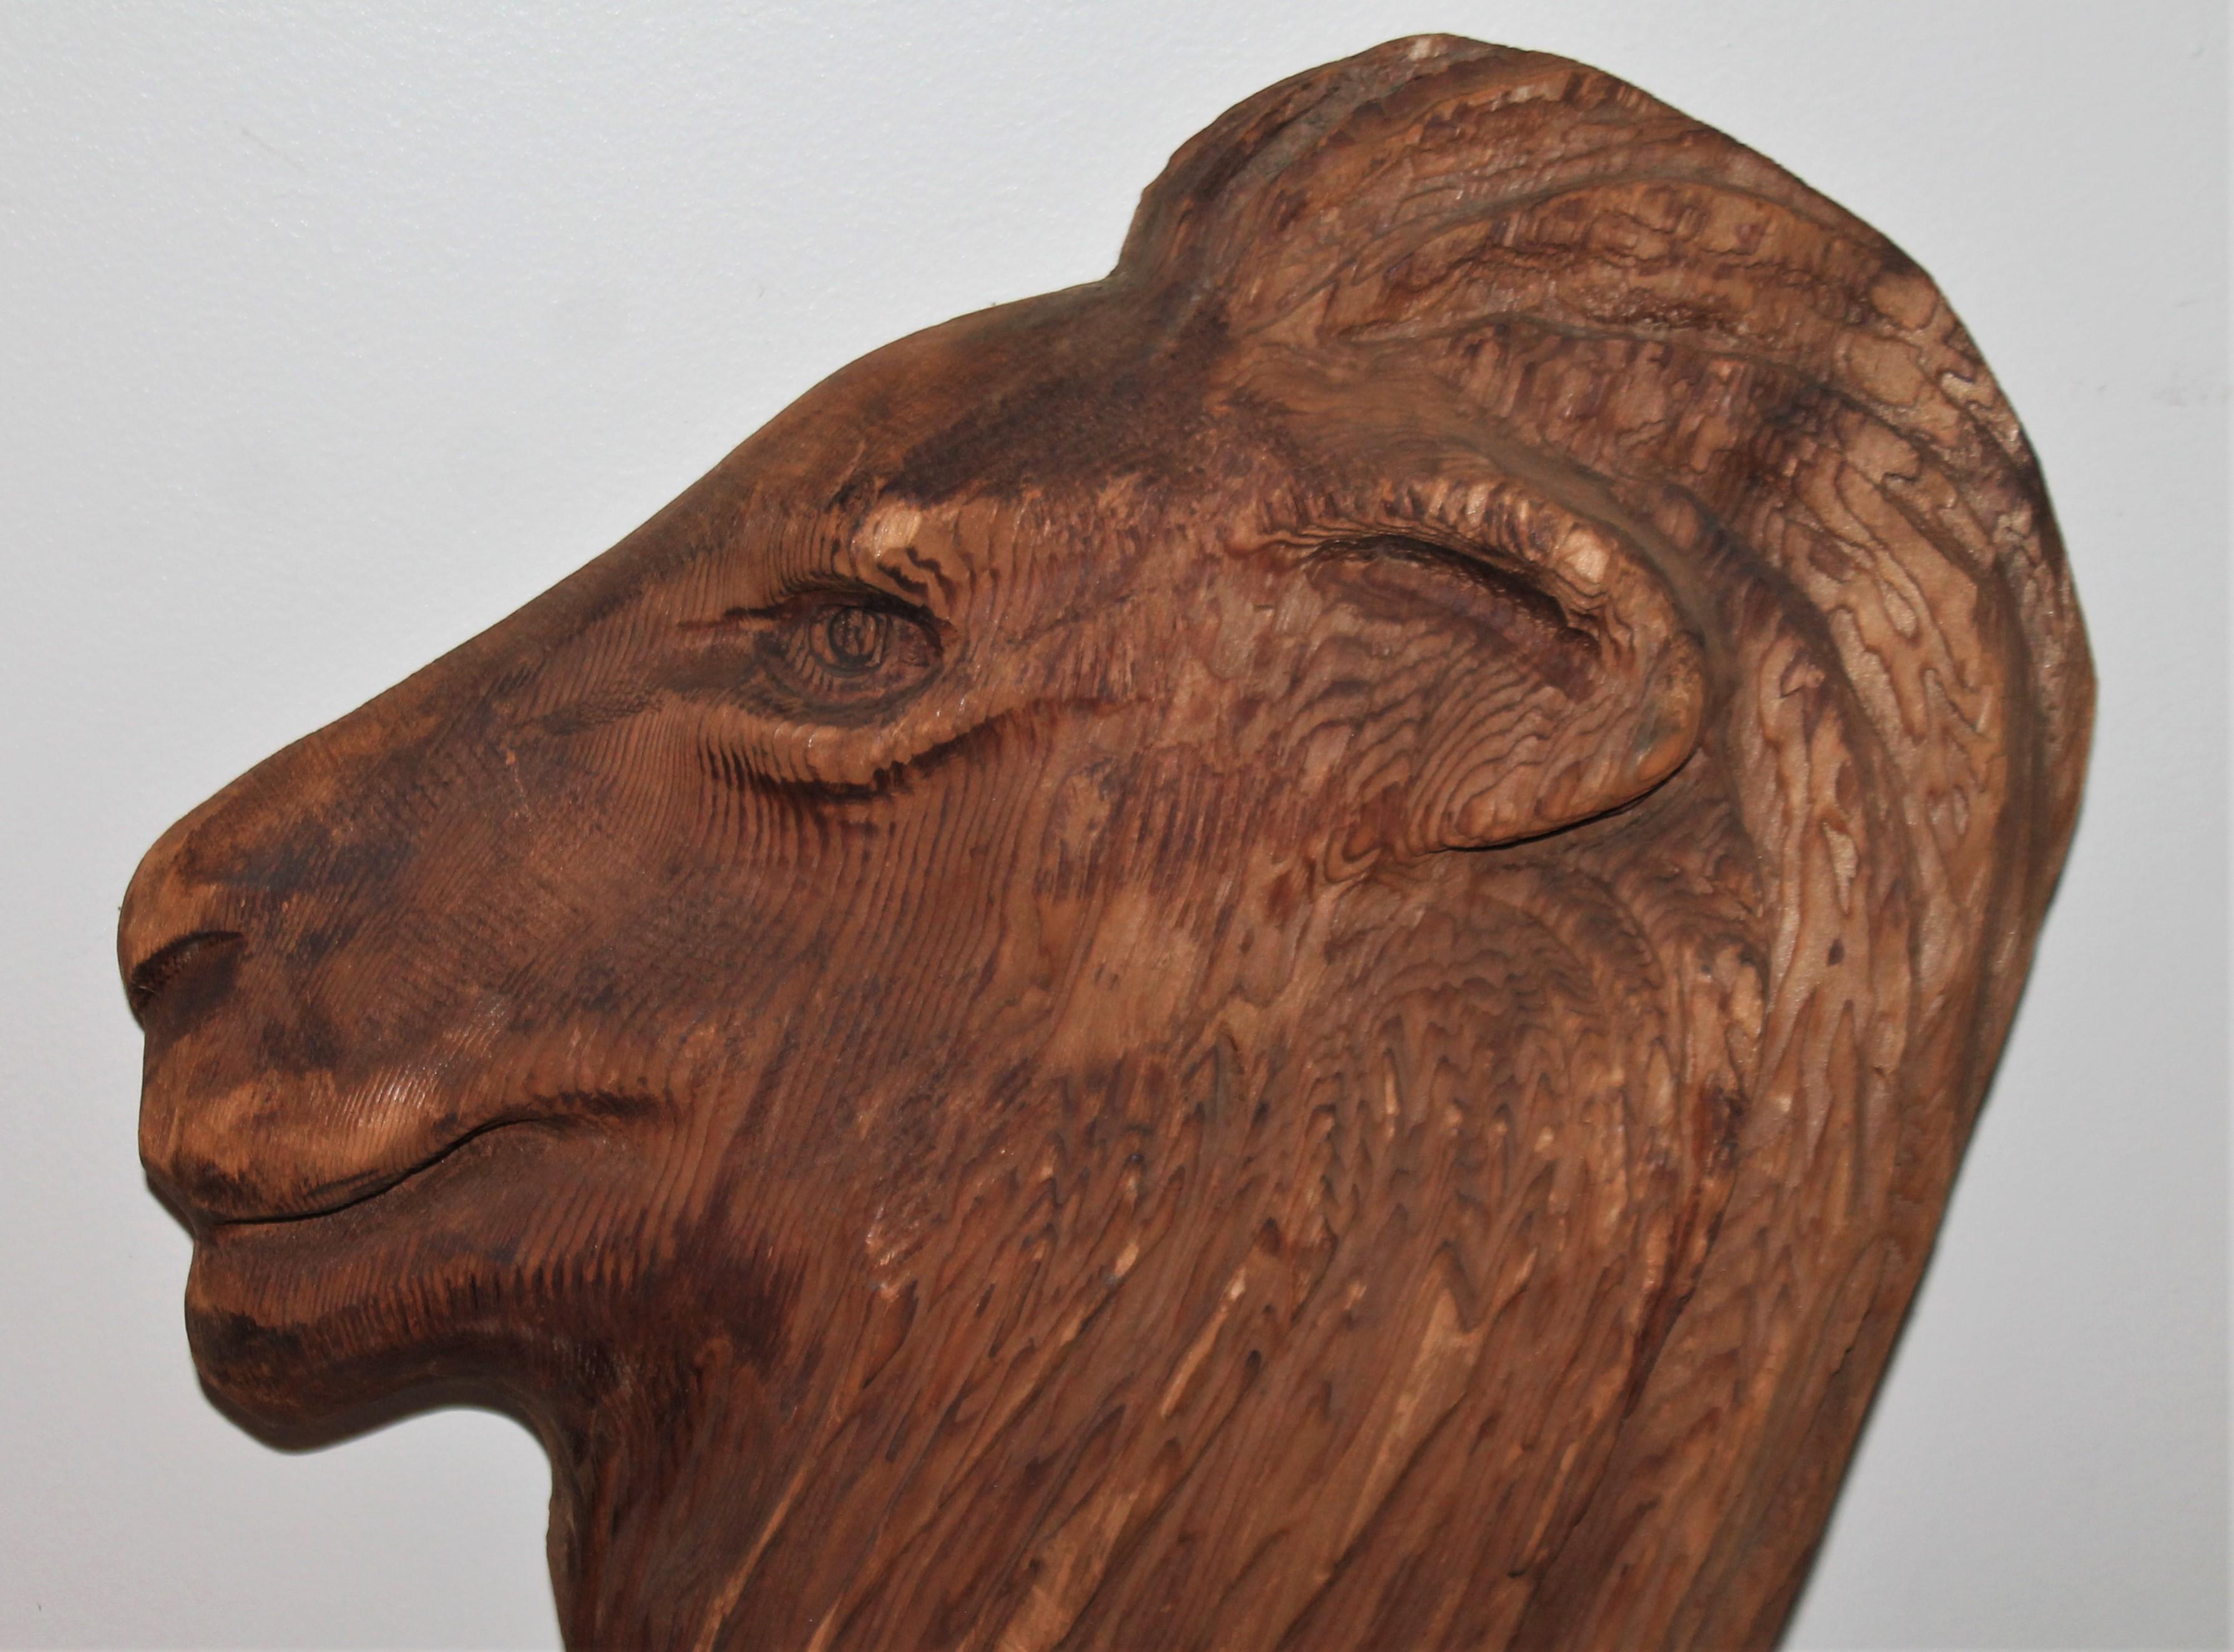 Early 20thc hand carved wood lion head from one solid piece of wood. Great form and proportional.